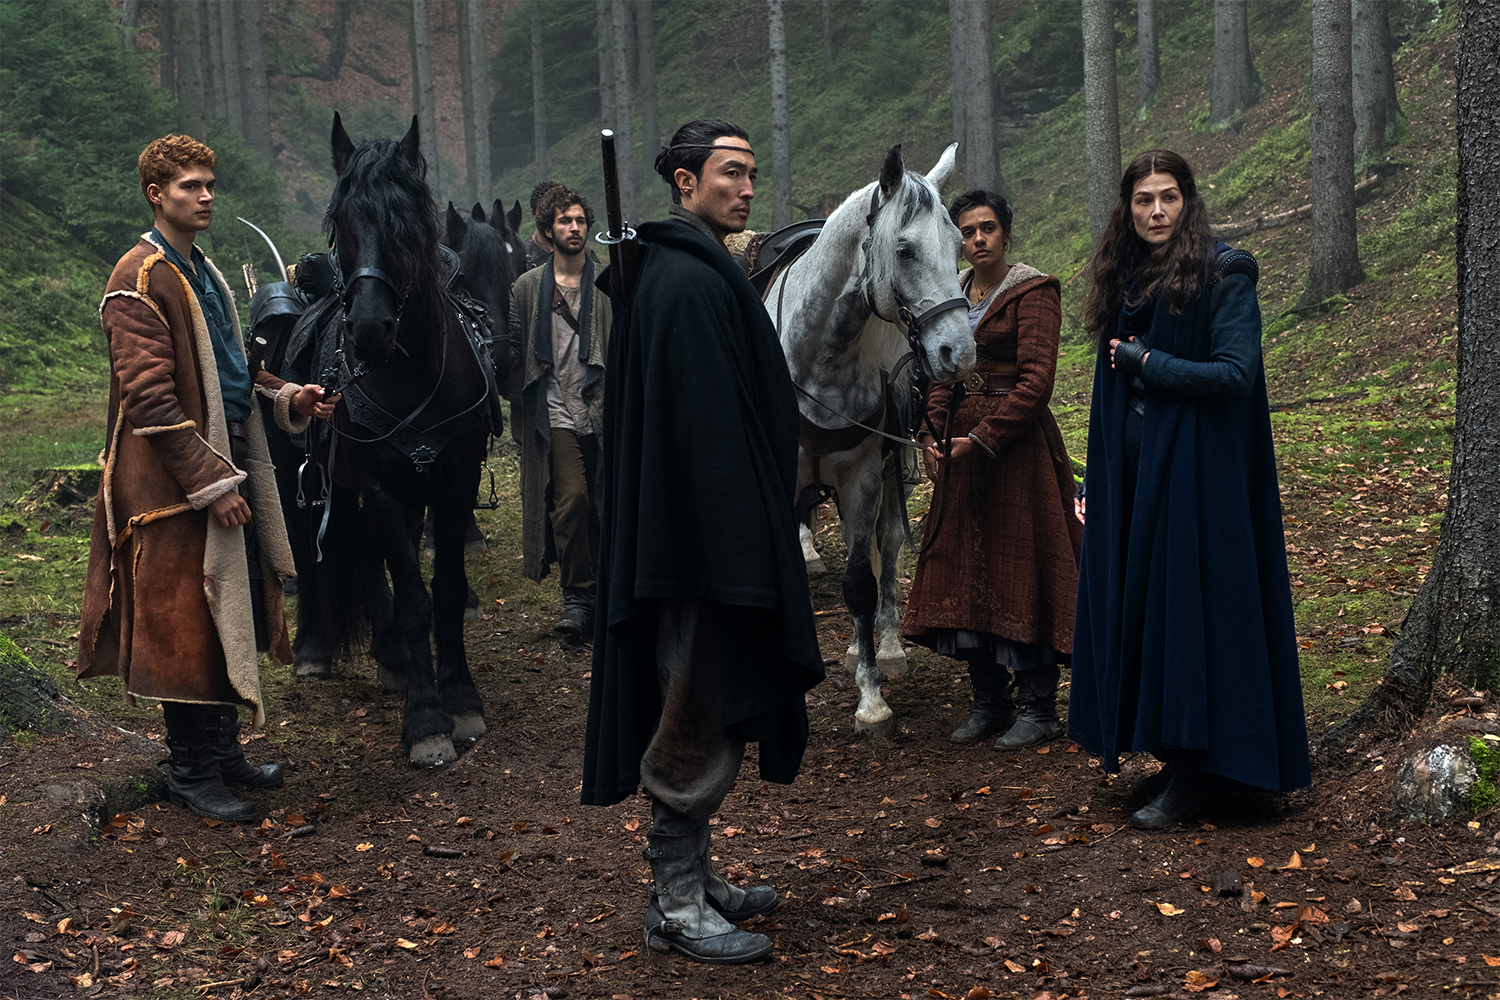 The main characters in the "Wheel of Time" Prime Video series, including Lan, Moiraine, Egwene, Mat and Rand, all standing in the forest in episode two of season one